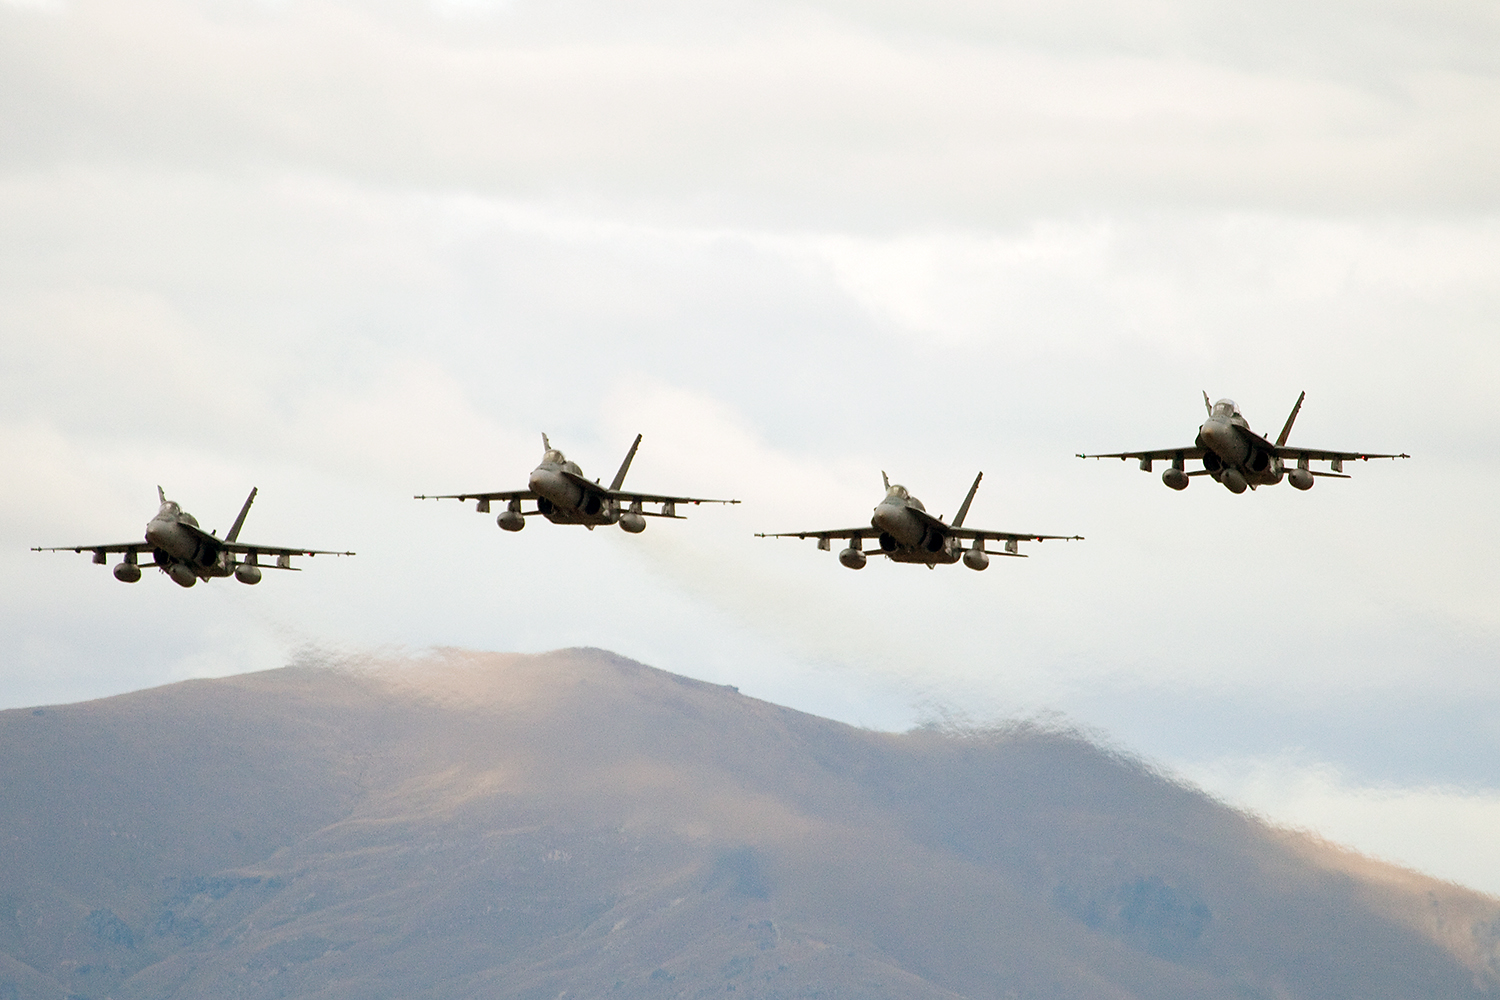 Four F-18 aircrafts flying over an mountainous region